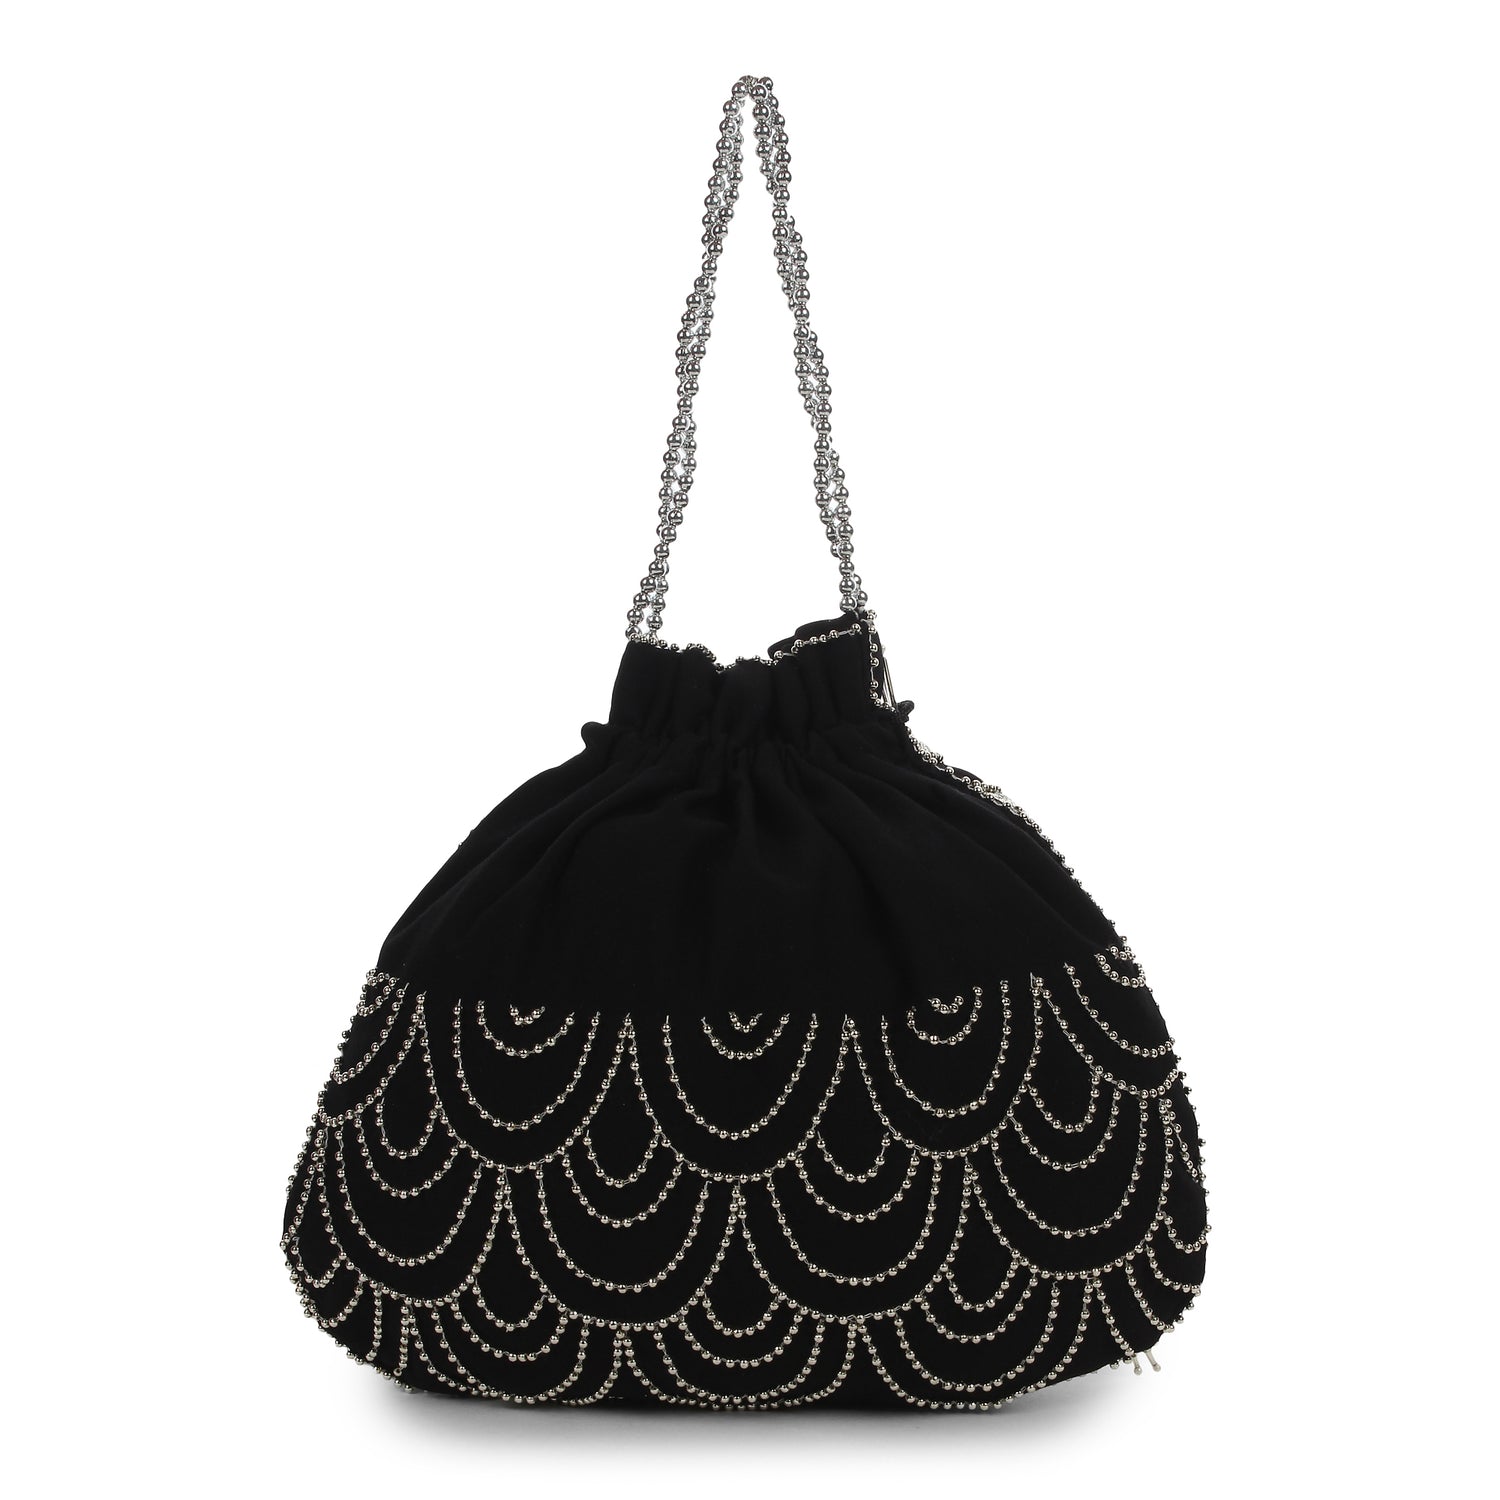 The Symmetrical | Quilted Leather Bag with Chain | Black Quilted Purse  Shoulder - ClutchToteBags.com